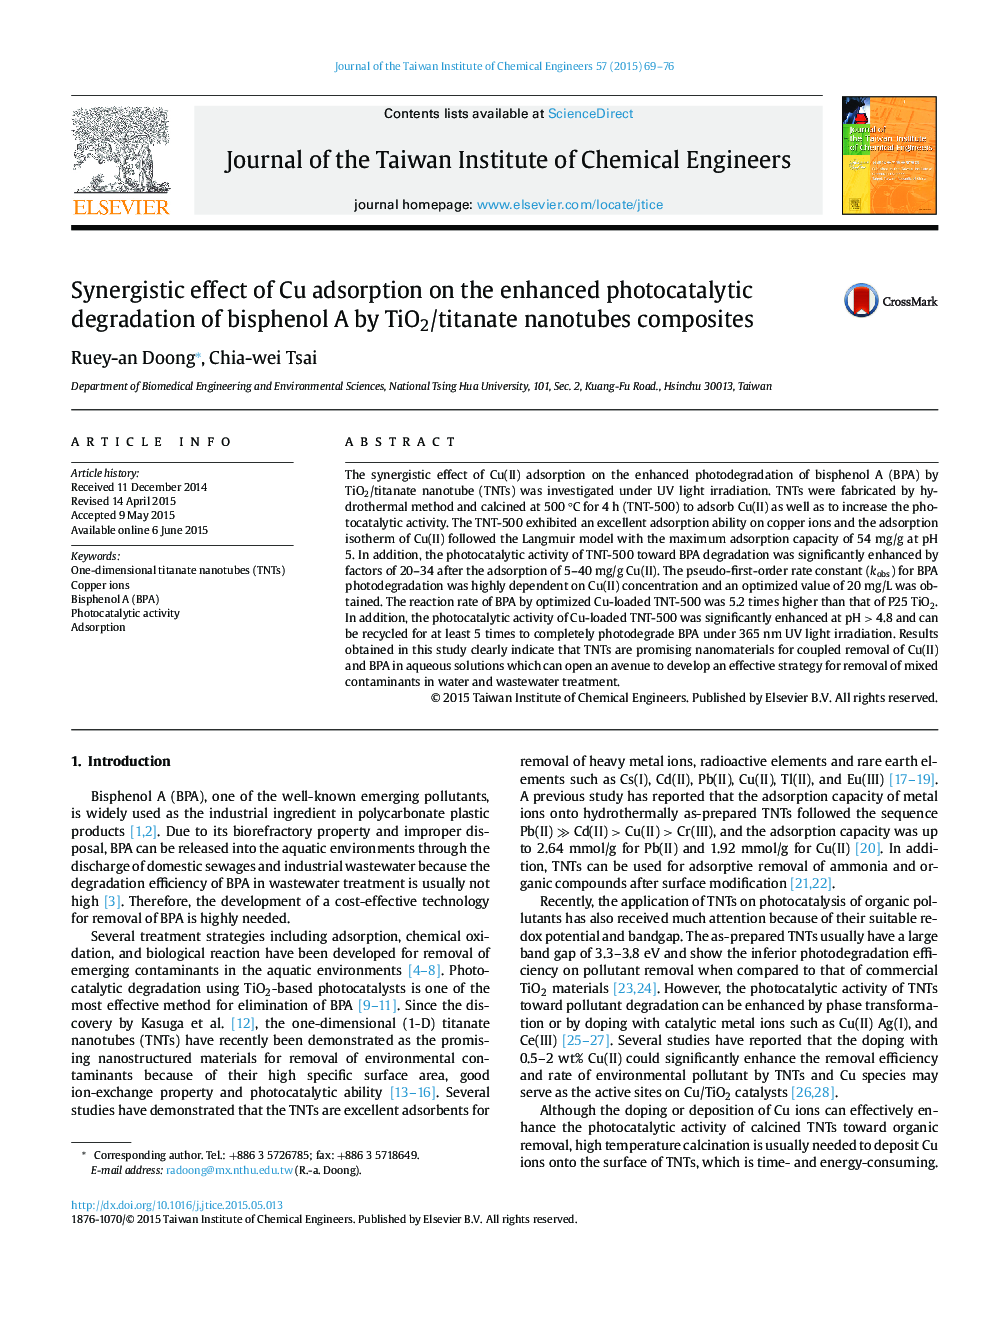 Synergistic effect of Cu adsorption on the enhanced photocatalytic degradation of bisphenol A by TiO2/titanate nanotubes composites